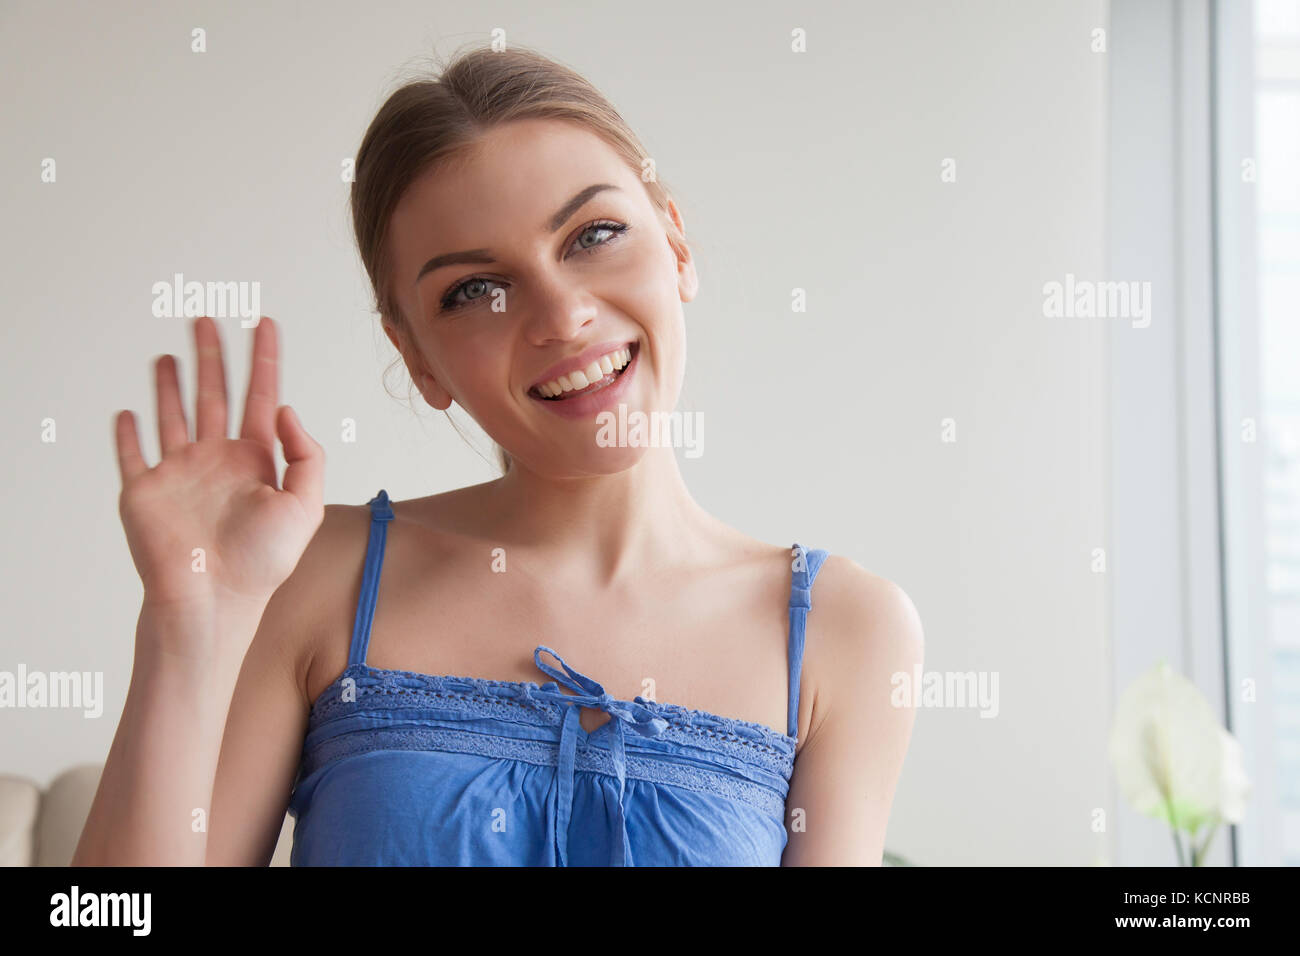 Smiling teen girl waving hand looking at web camera, happy young lady making video call at home, greeting online by webcam or recording videoblog, say Stock Photo